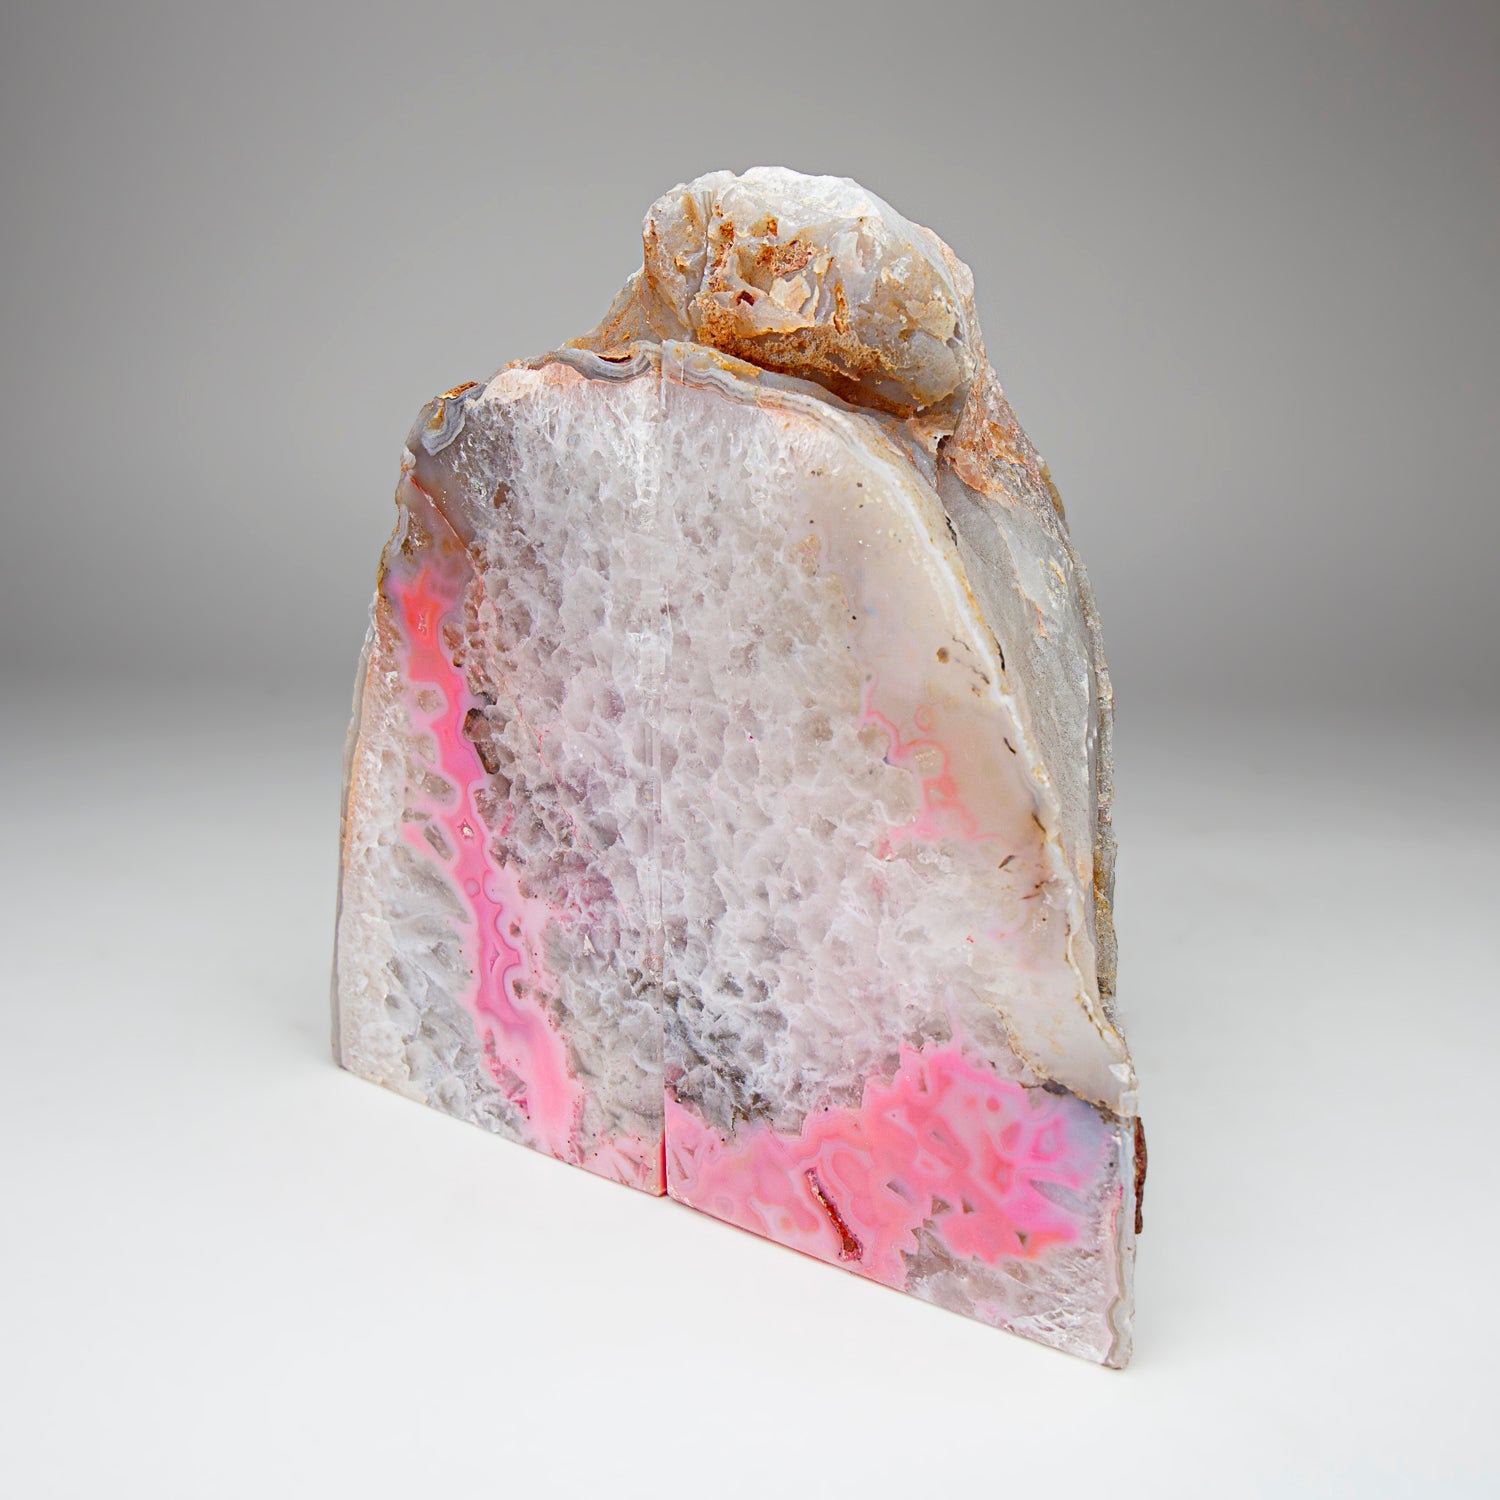 Genuine Quartz with Pink Agate Bookends from Brazil (8.5 lbs)